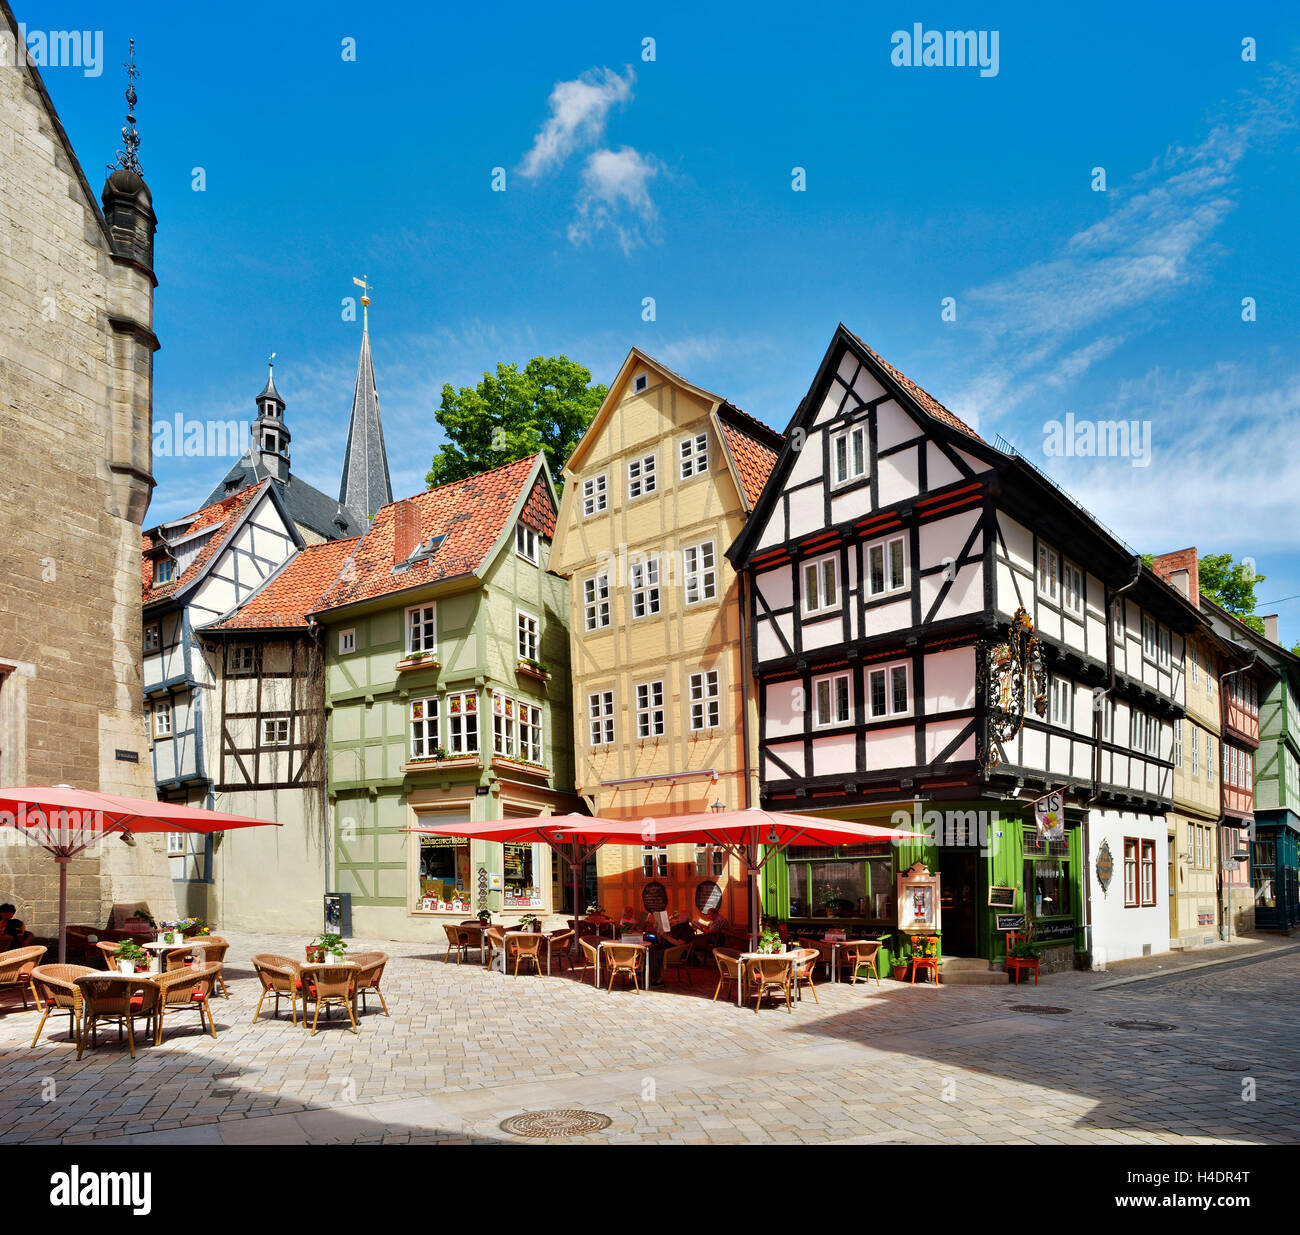 Germany, Saxony-Anhalt, Quedlinburg, oblique and winding half-timbered houses in the historical Old Town Stock Photo